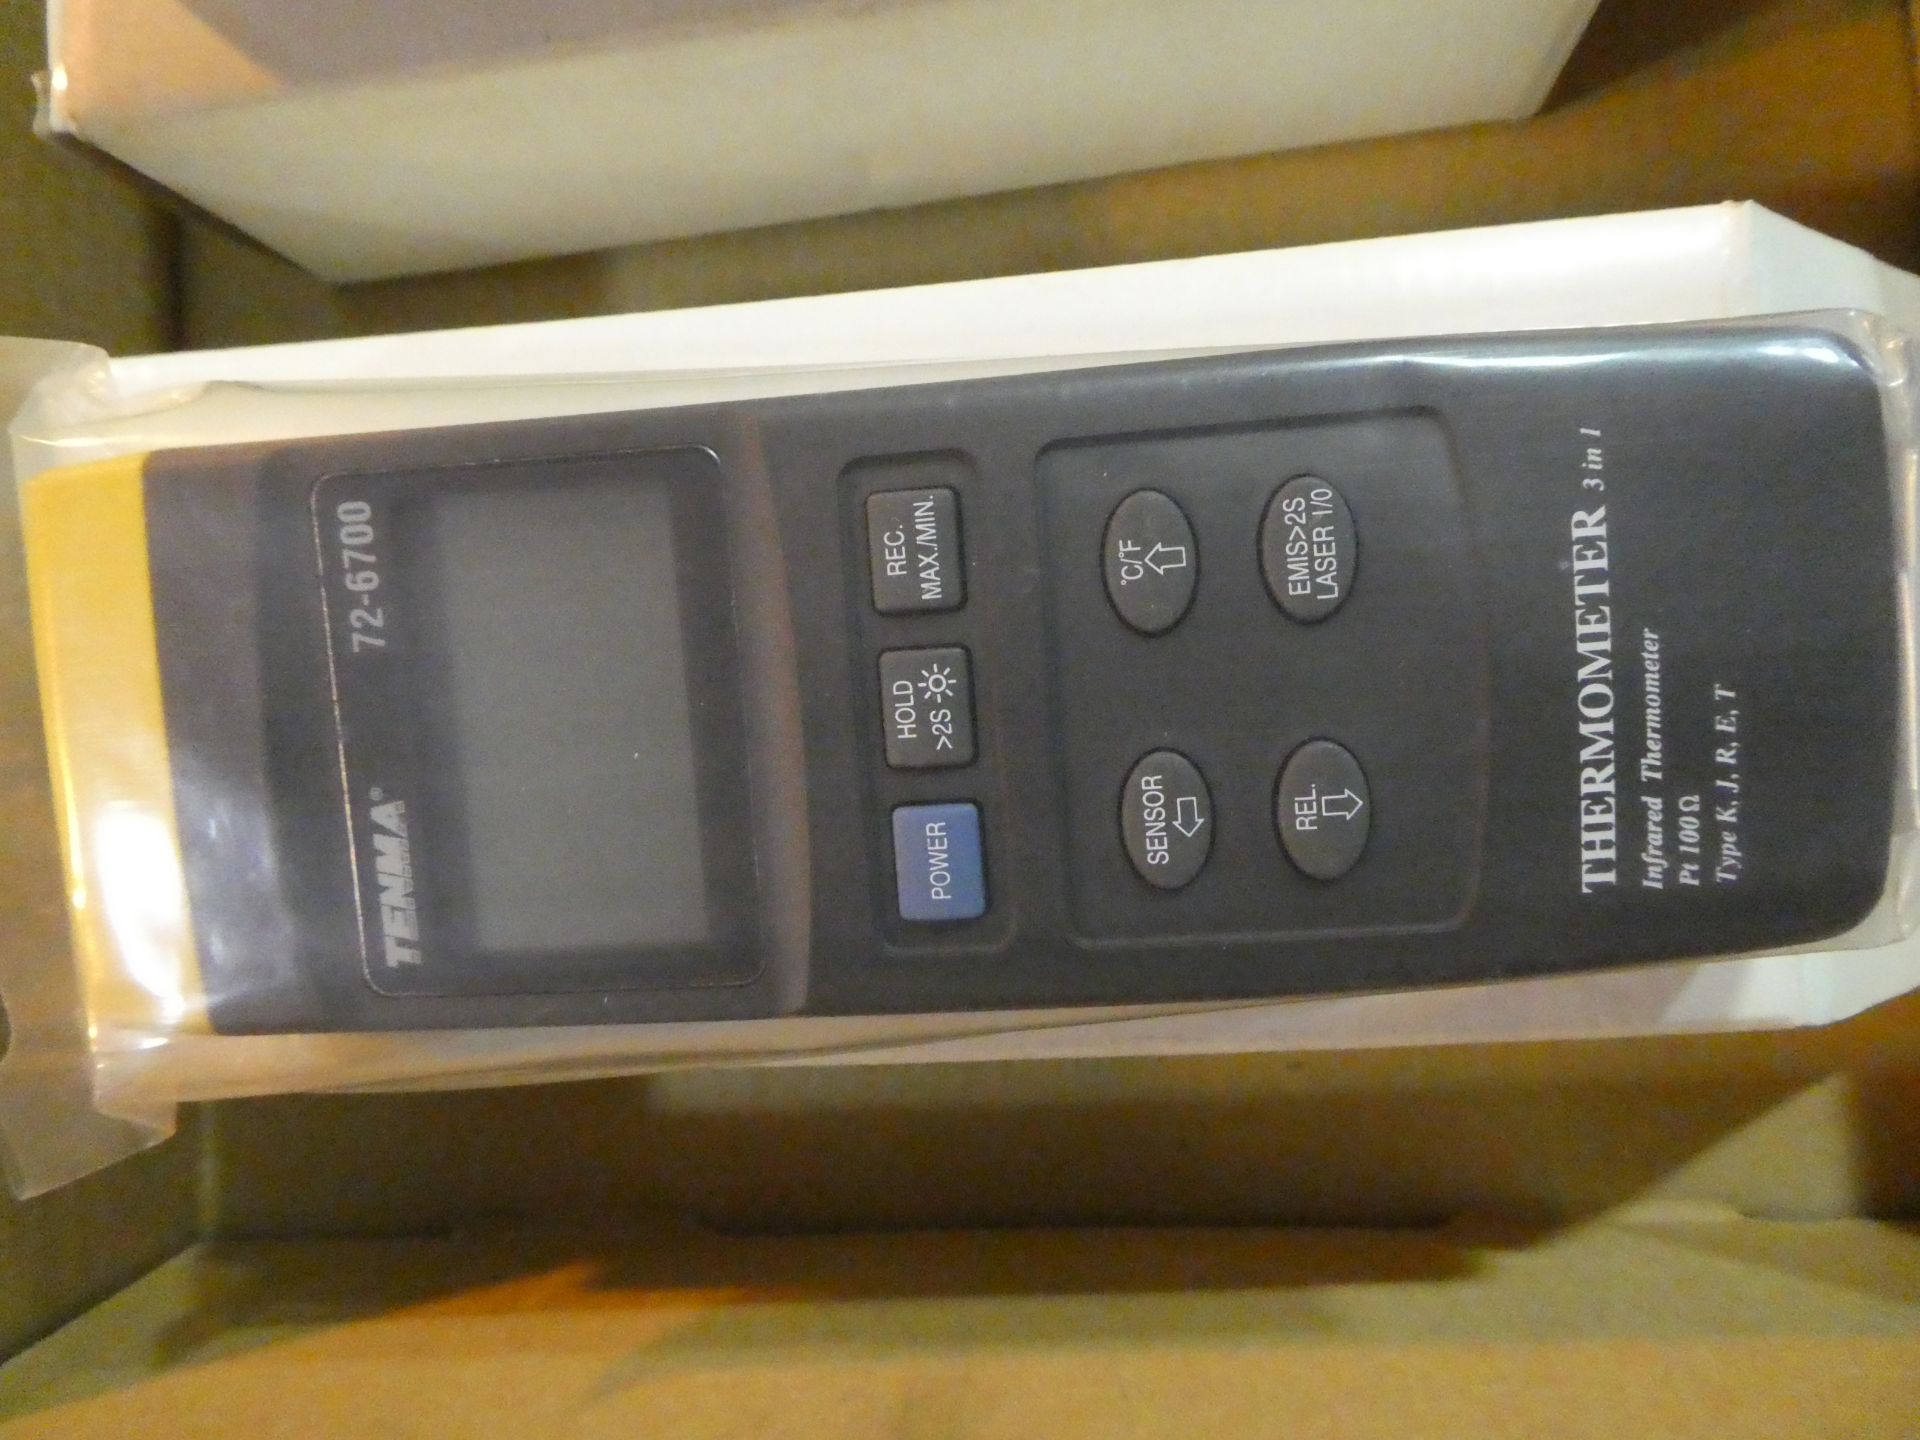 (2) Tenma 72-6700 Infrared Thermometers - Image 2 of 2